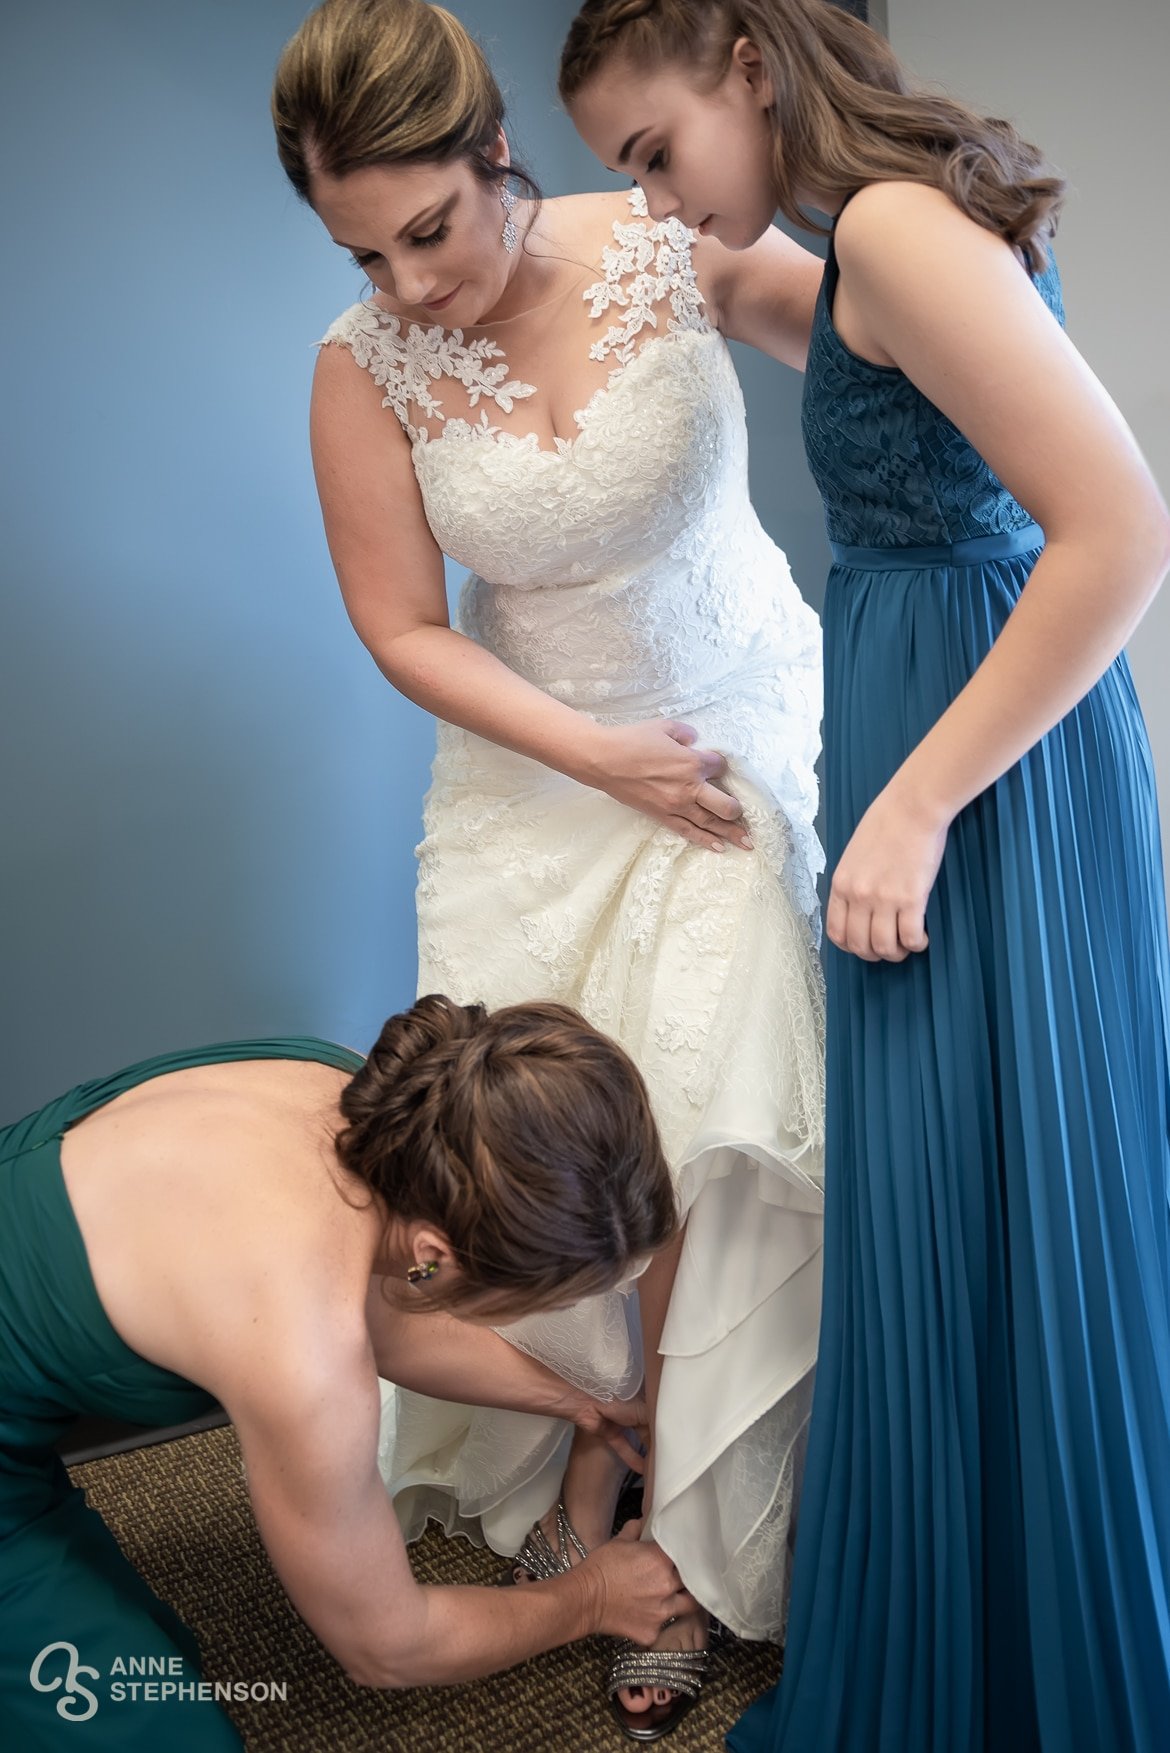 One of the bride's attendants helps with fastening her sandals.